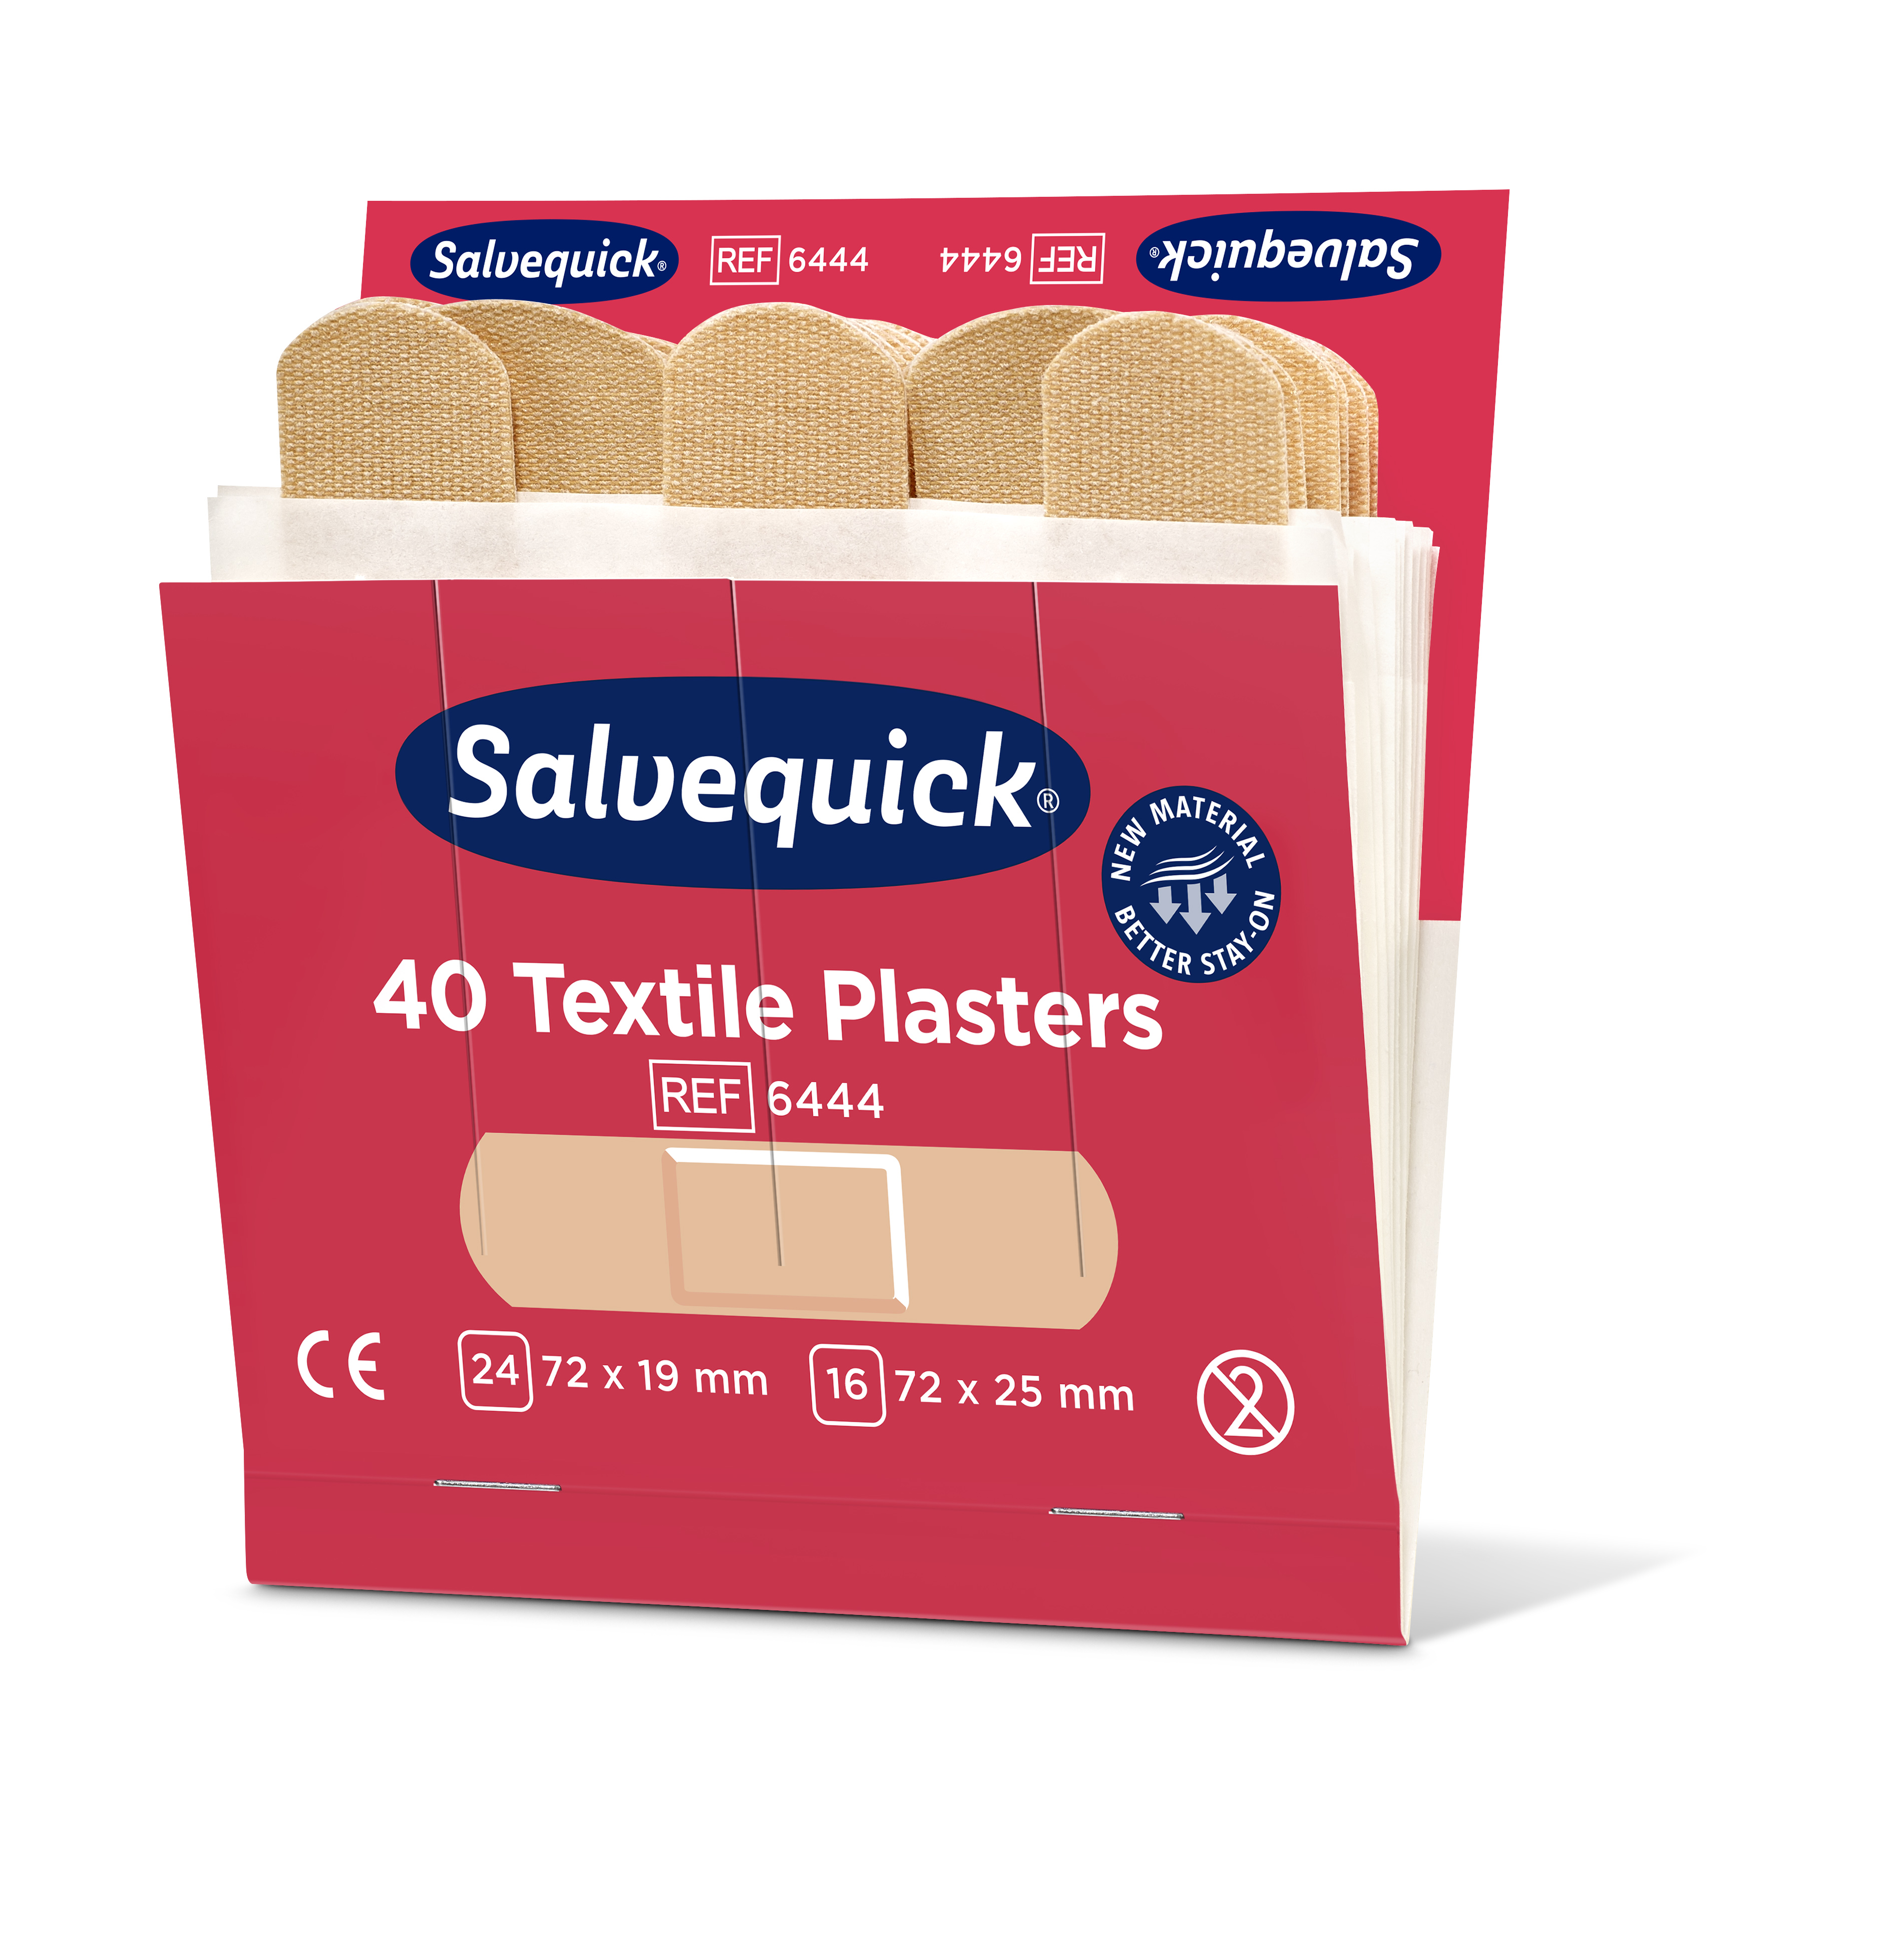 CEDERROTH Salvequick Textilpflaster - Packung à 6 x 40 Pflaster